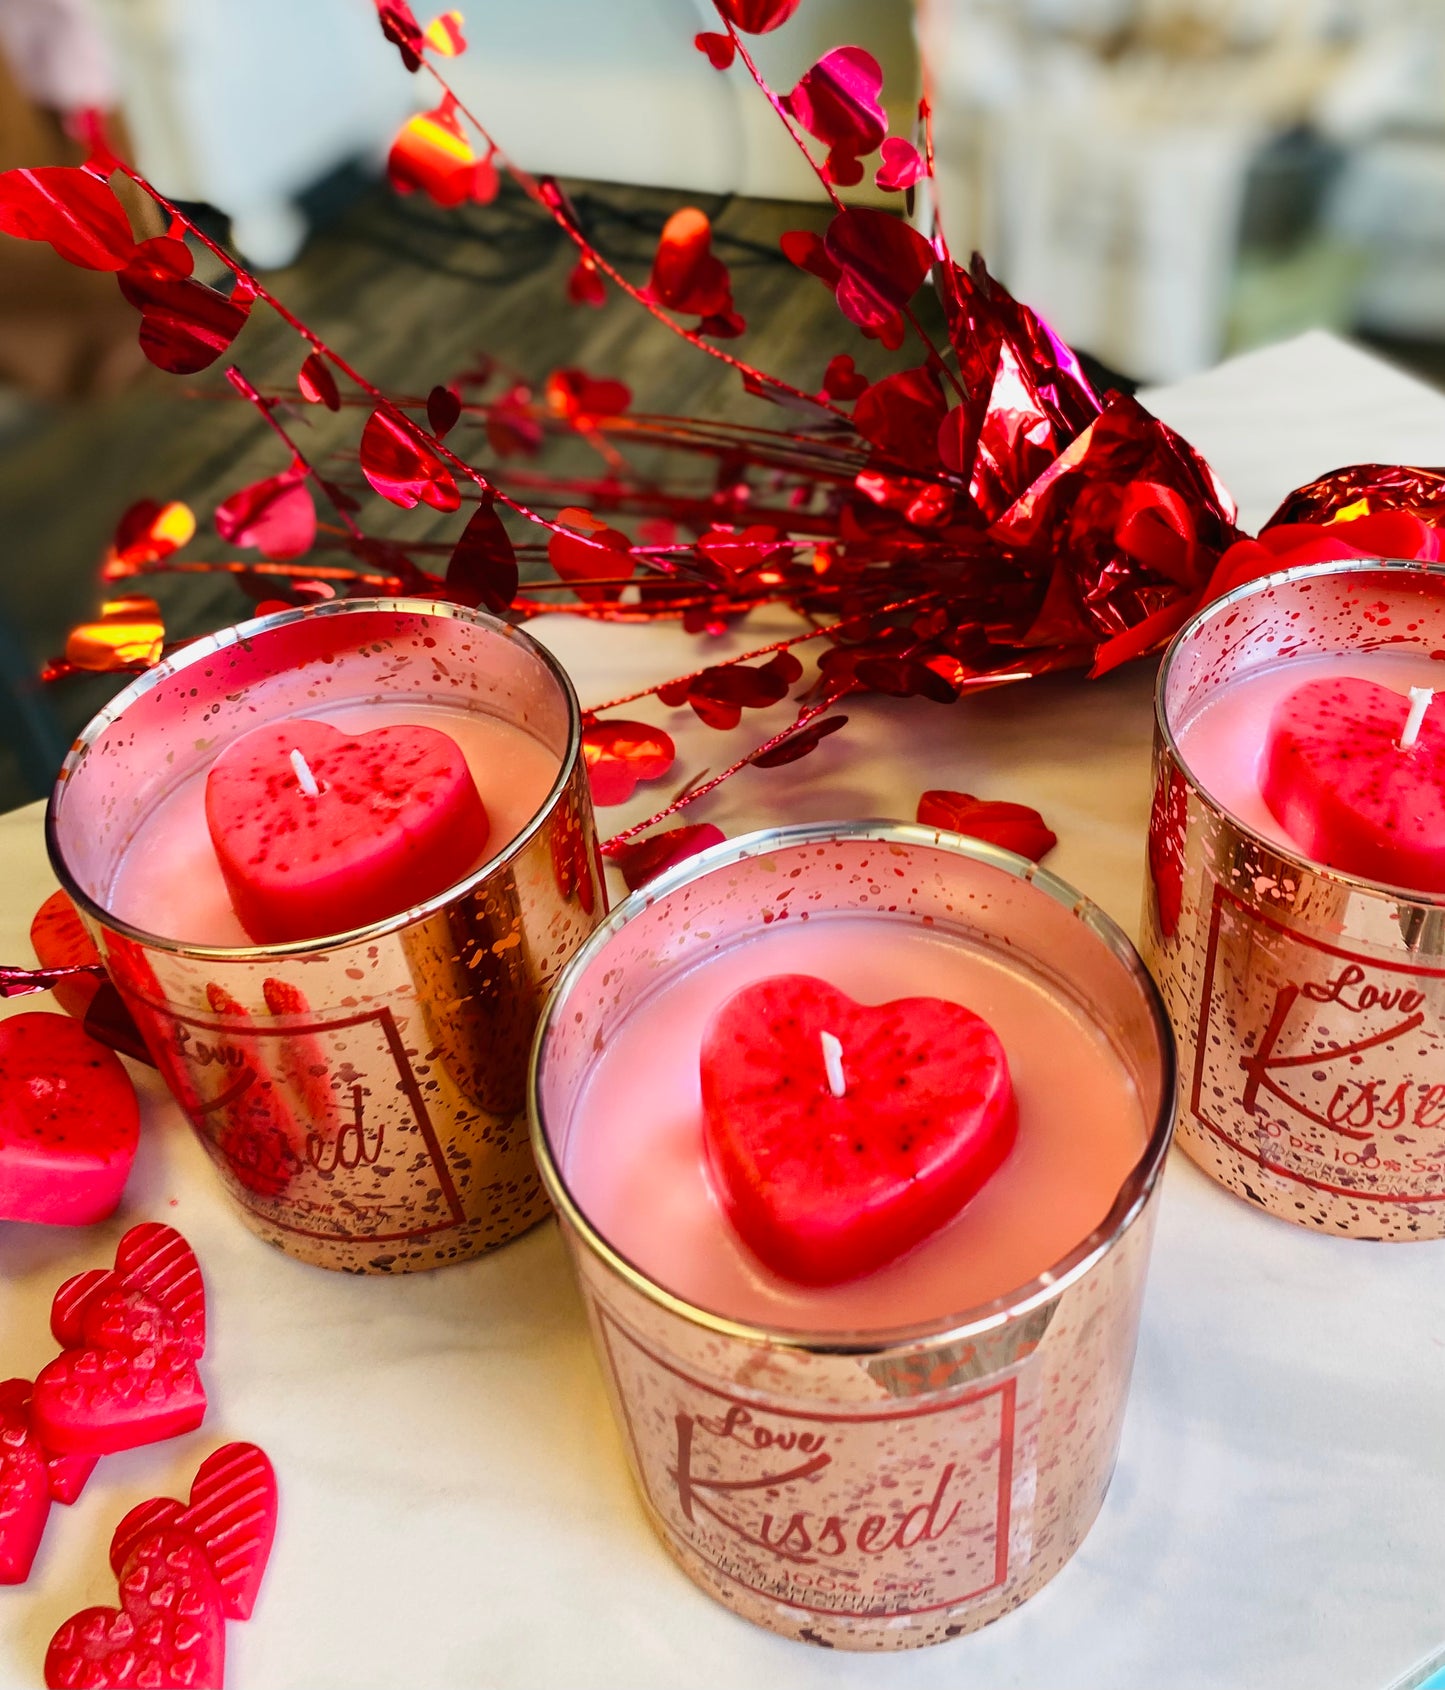 Love Kissed Couples Candle Making Thursday, Feb. 8th 3pm